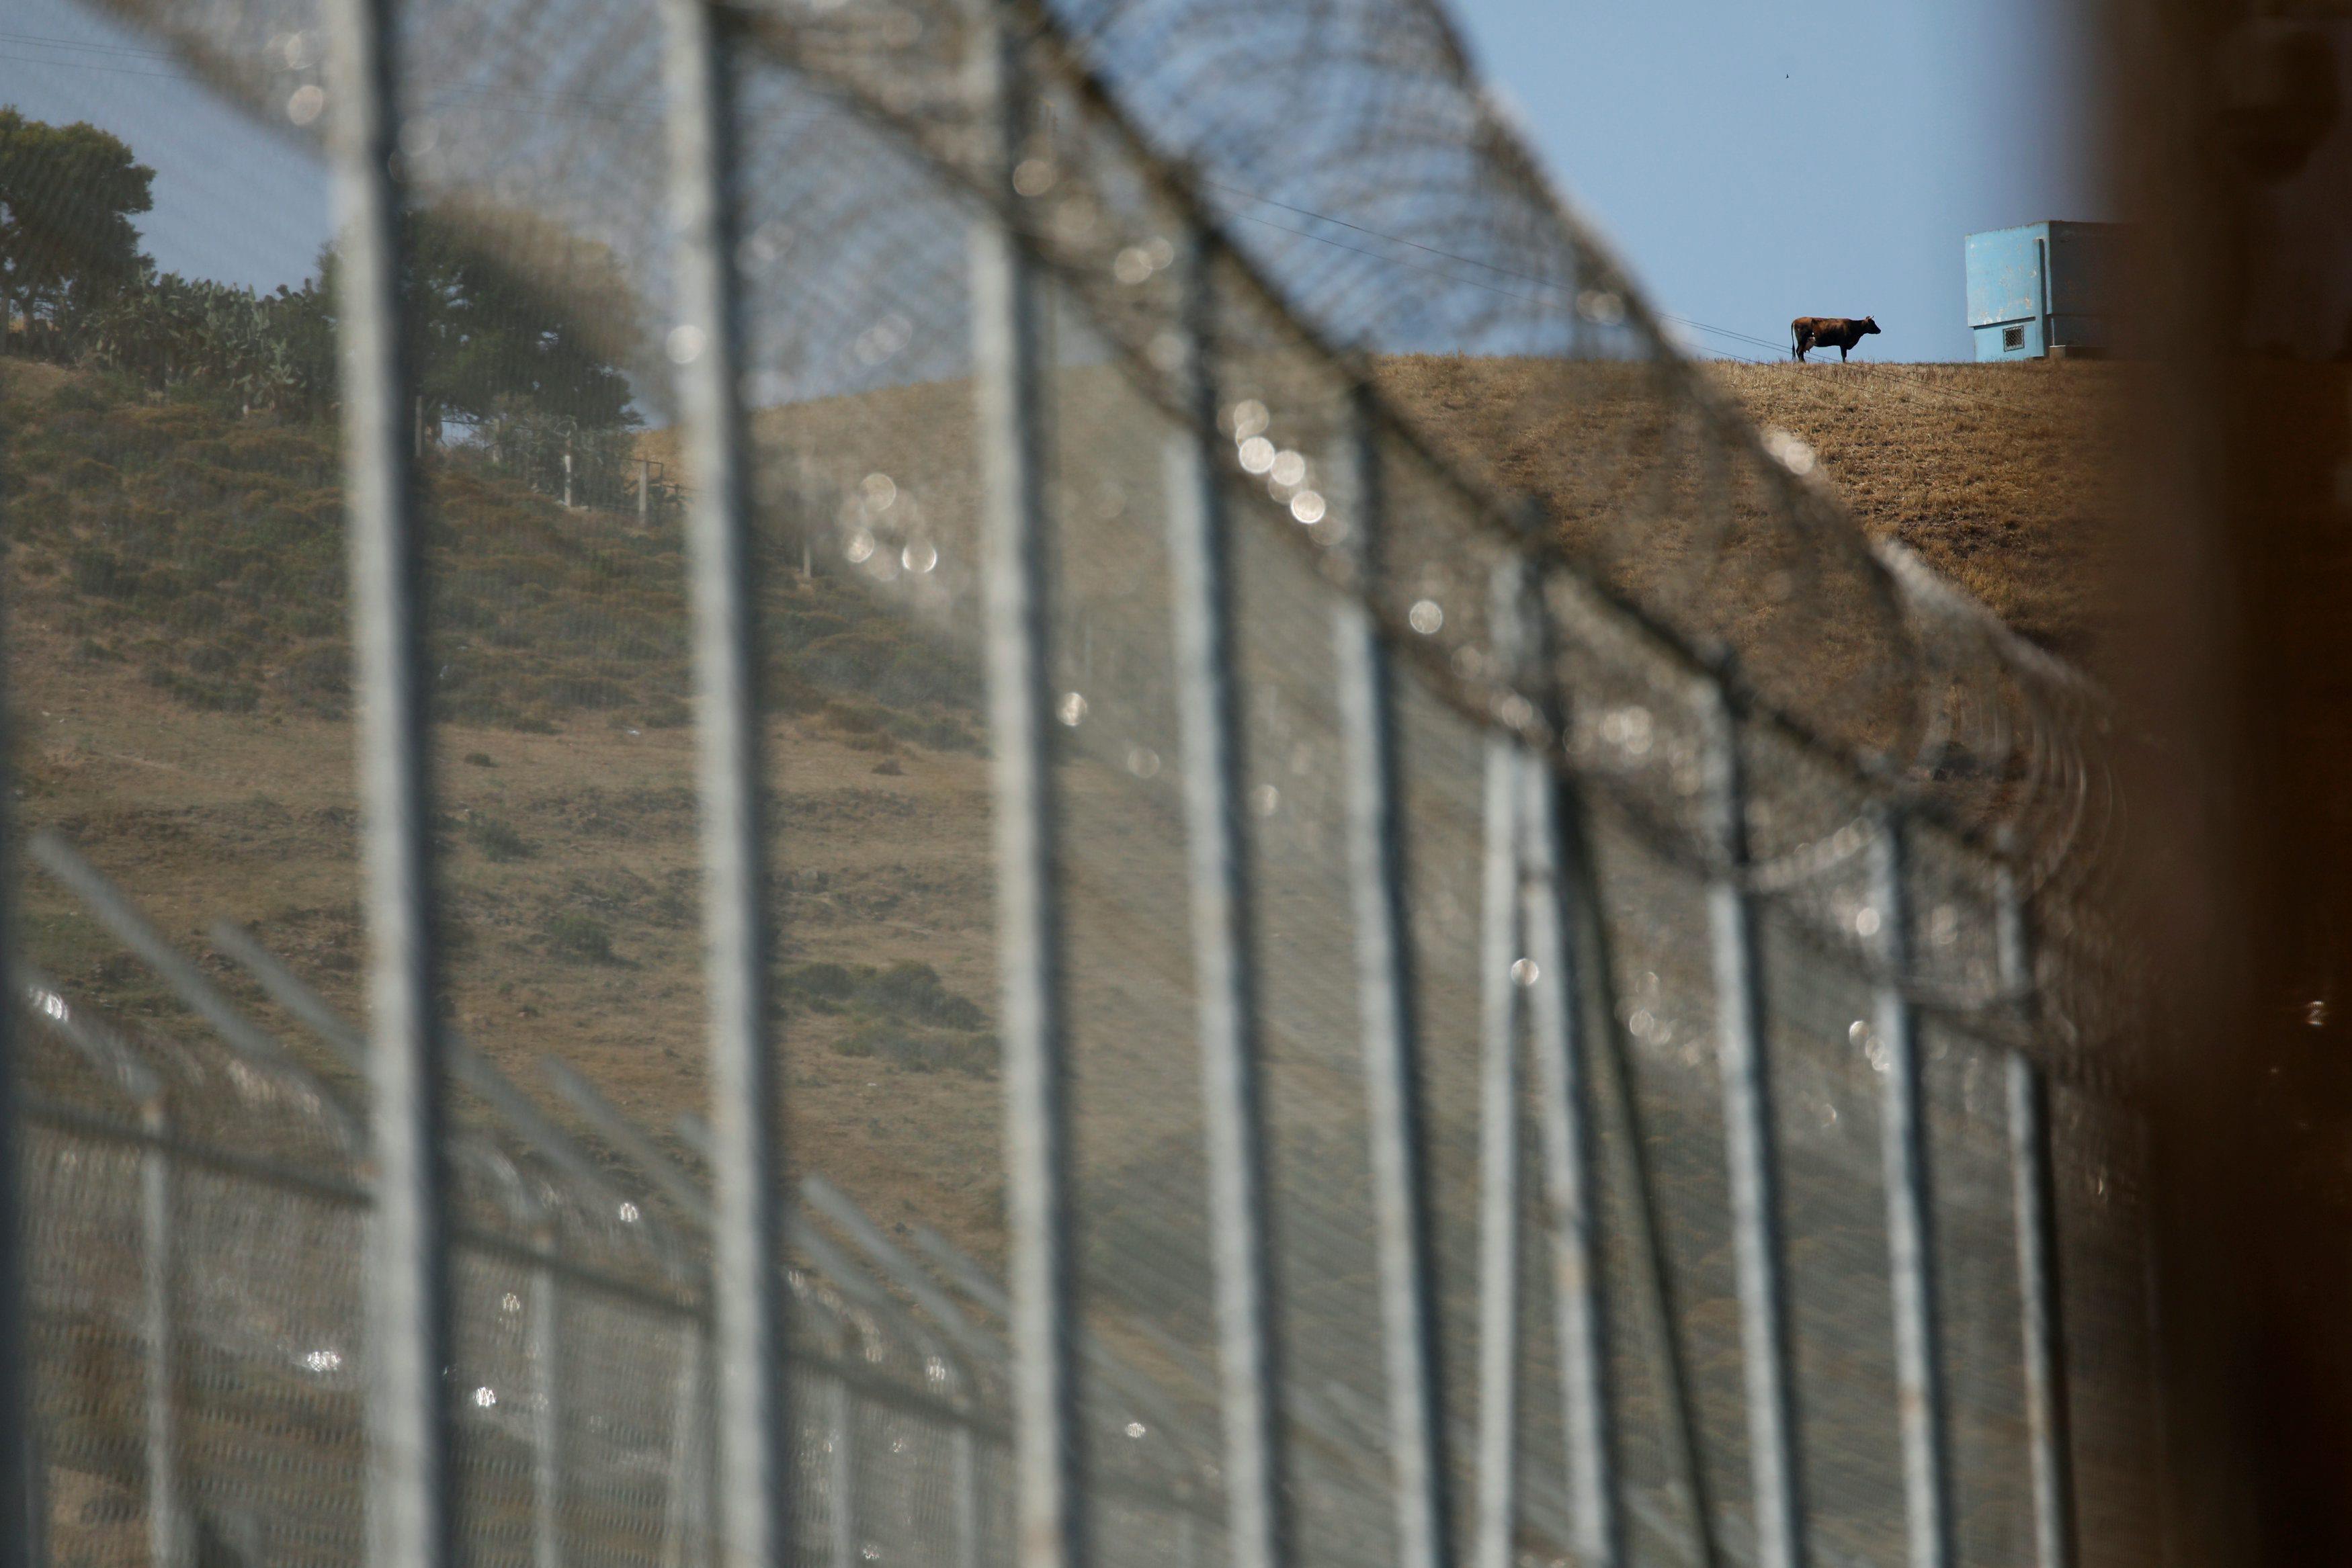 The border fence separating Spain's northern enclave Ceuta and Morocco is seen from Ceuta